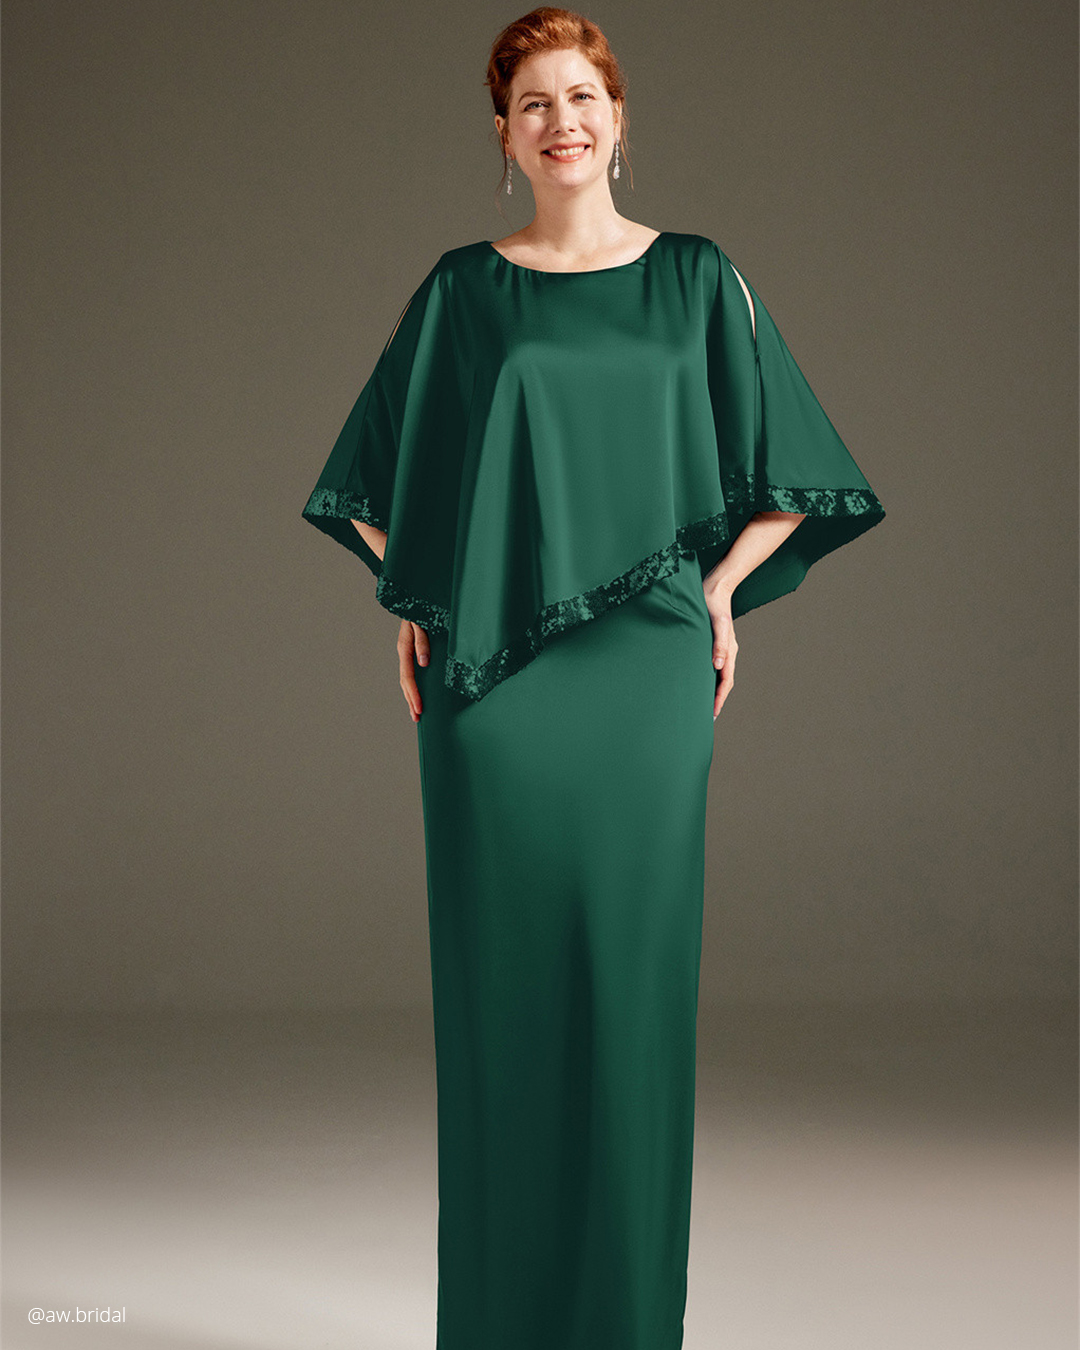 mother of the groom dresses green emerald simple awbridal